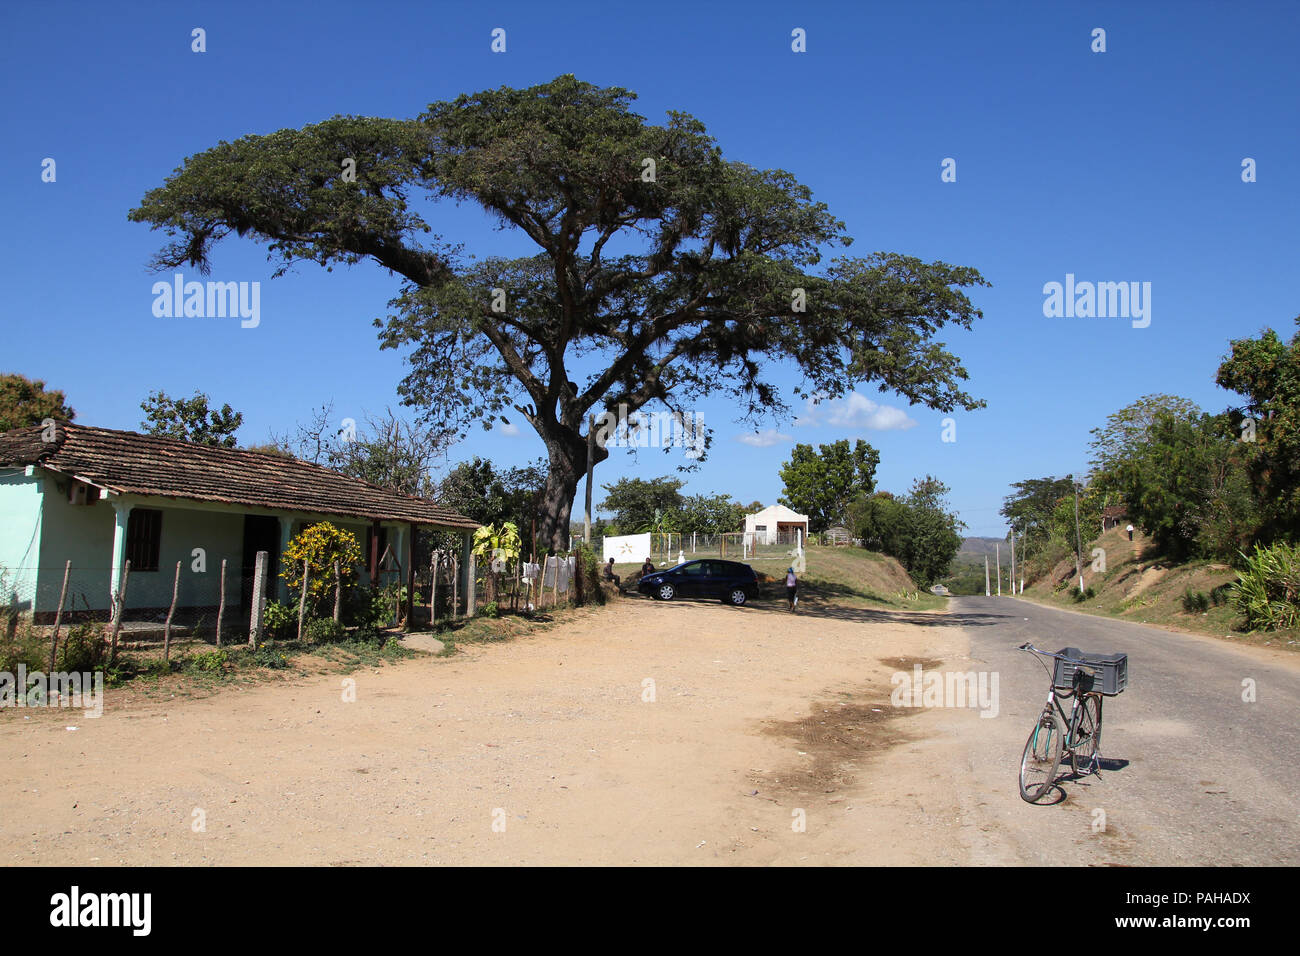 Cuba - typical village near Trinidad. Bicycle parked in the street. Stock Photo